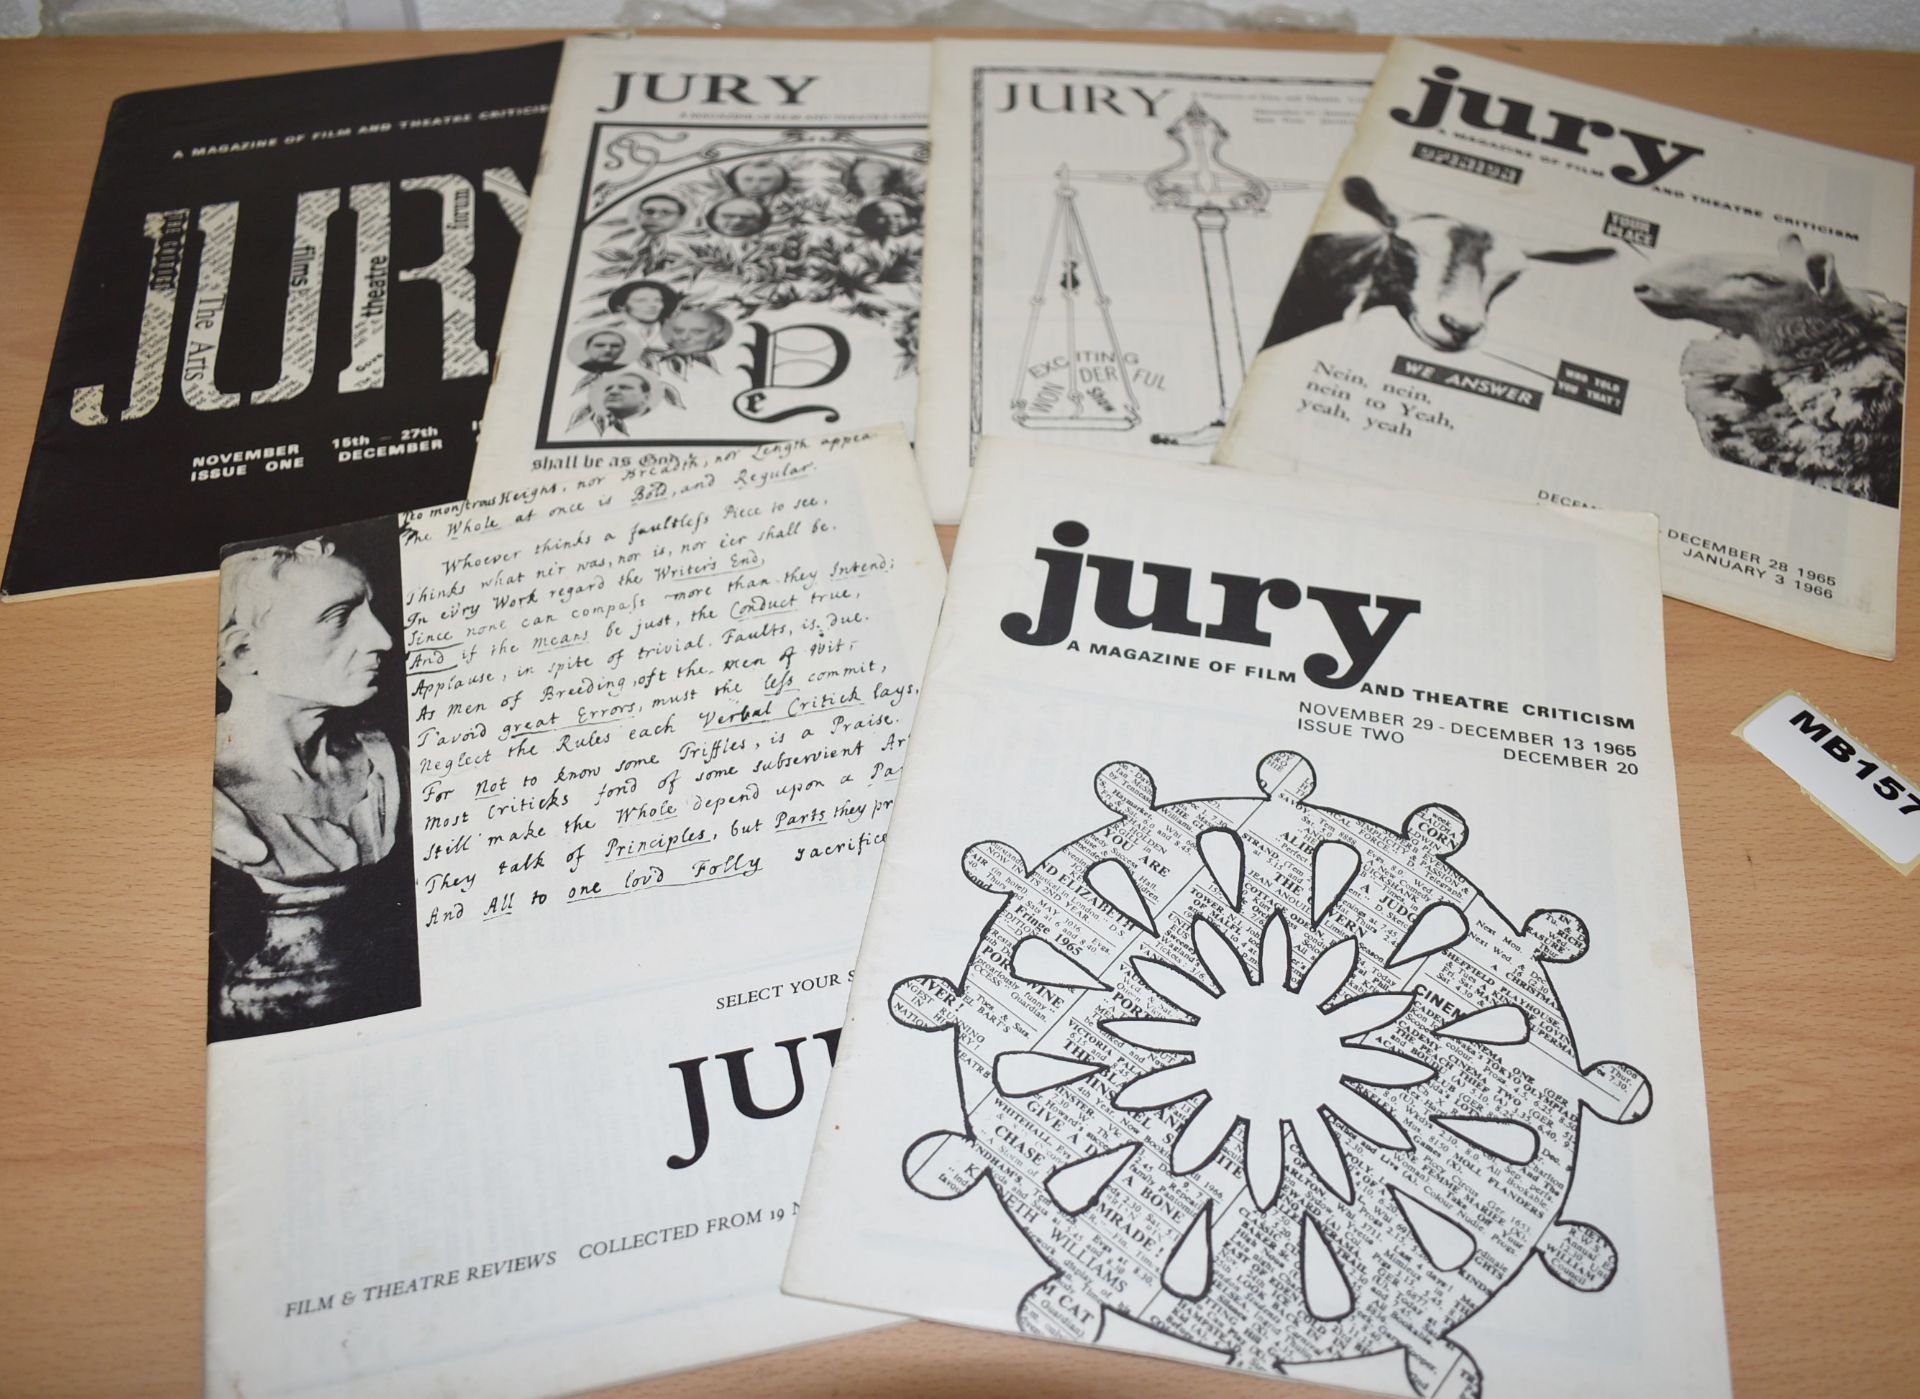 6 x Jury Film and Theatre Criticism Magainzes  Dated 1965 to 1966 - Ref MB157 - CL431 - Location: